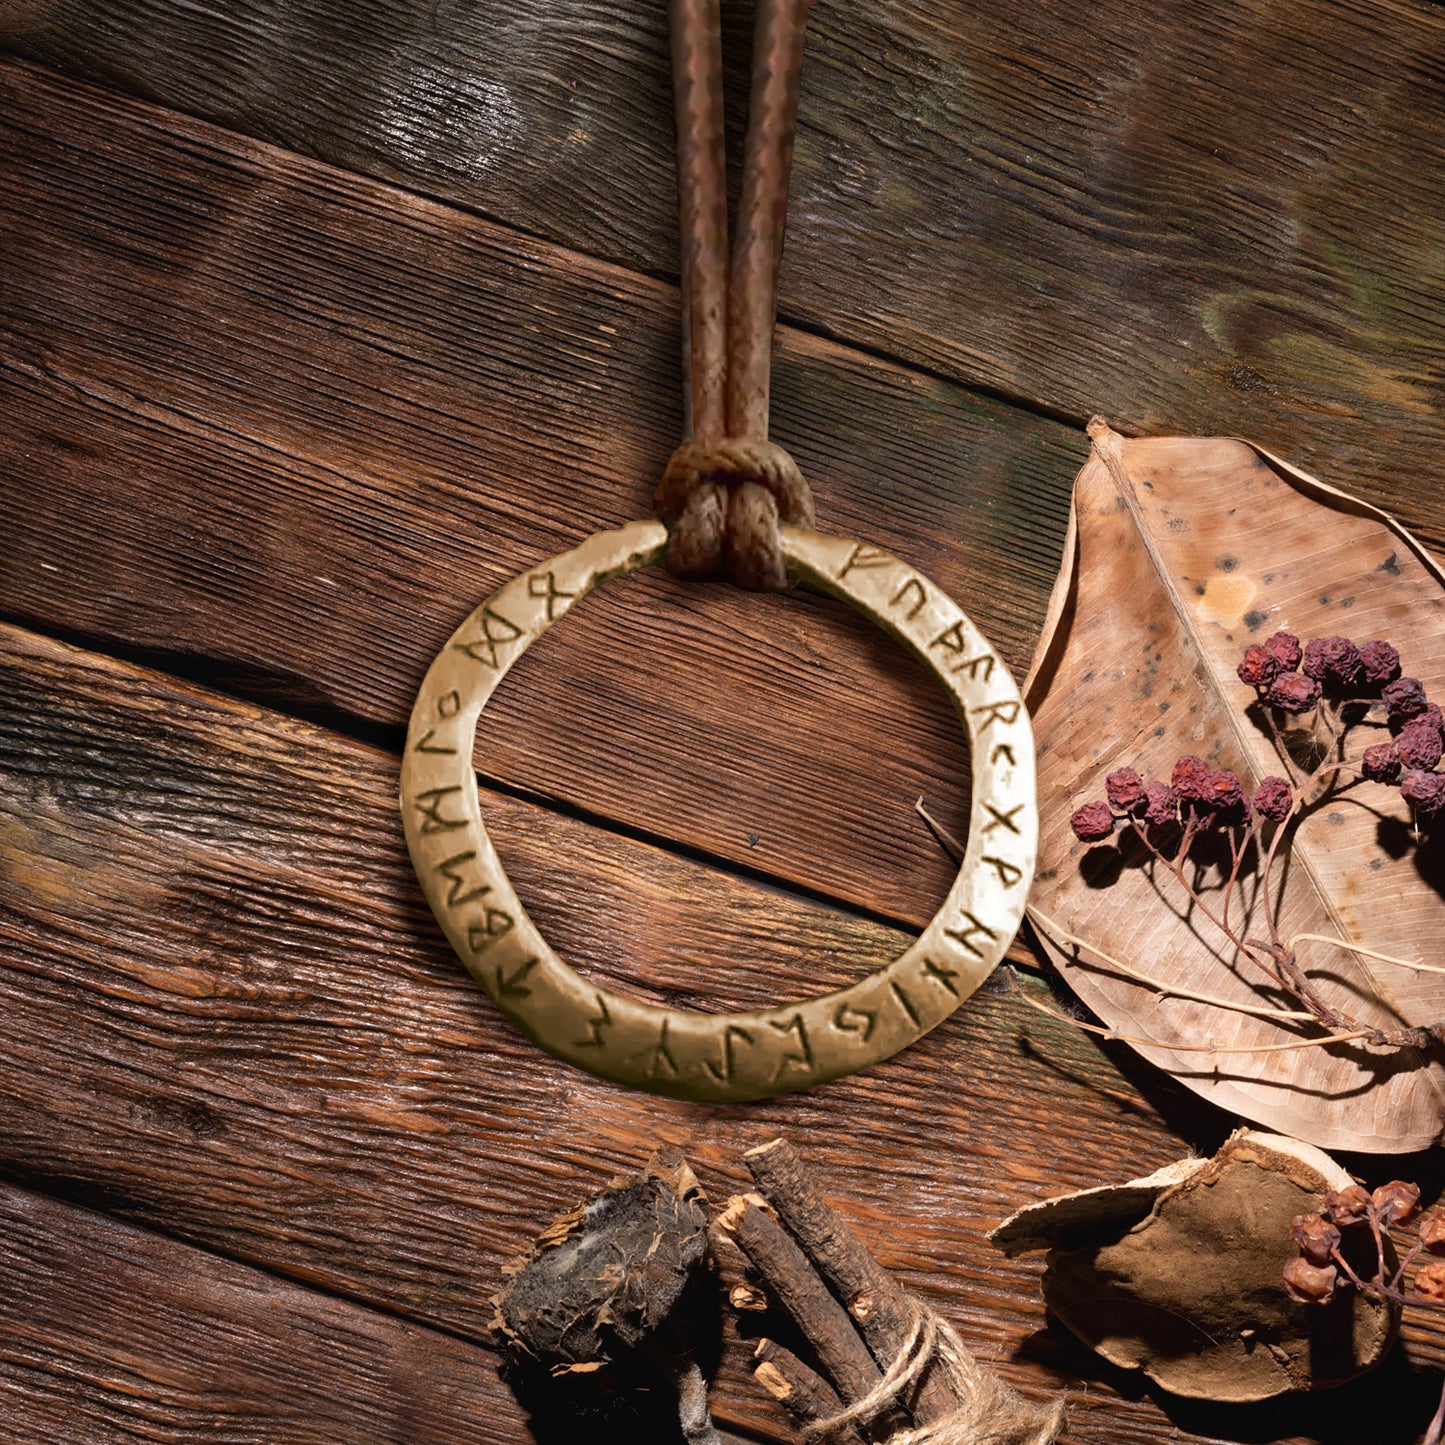 Close up of a brass pendant on a rope necklace, against a wooden tabletop. The pendant is an open circle, with Nordic runes printed around the edge. Next to the pendant are dried leaves and berries.